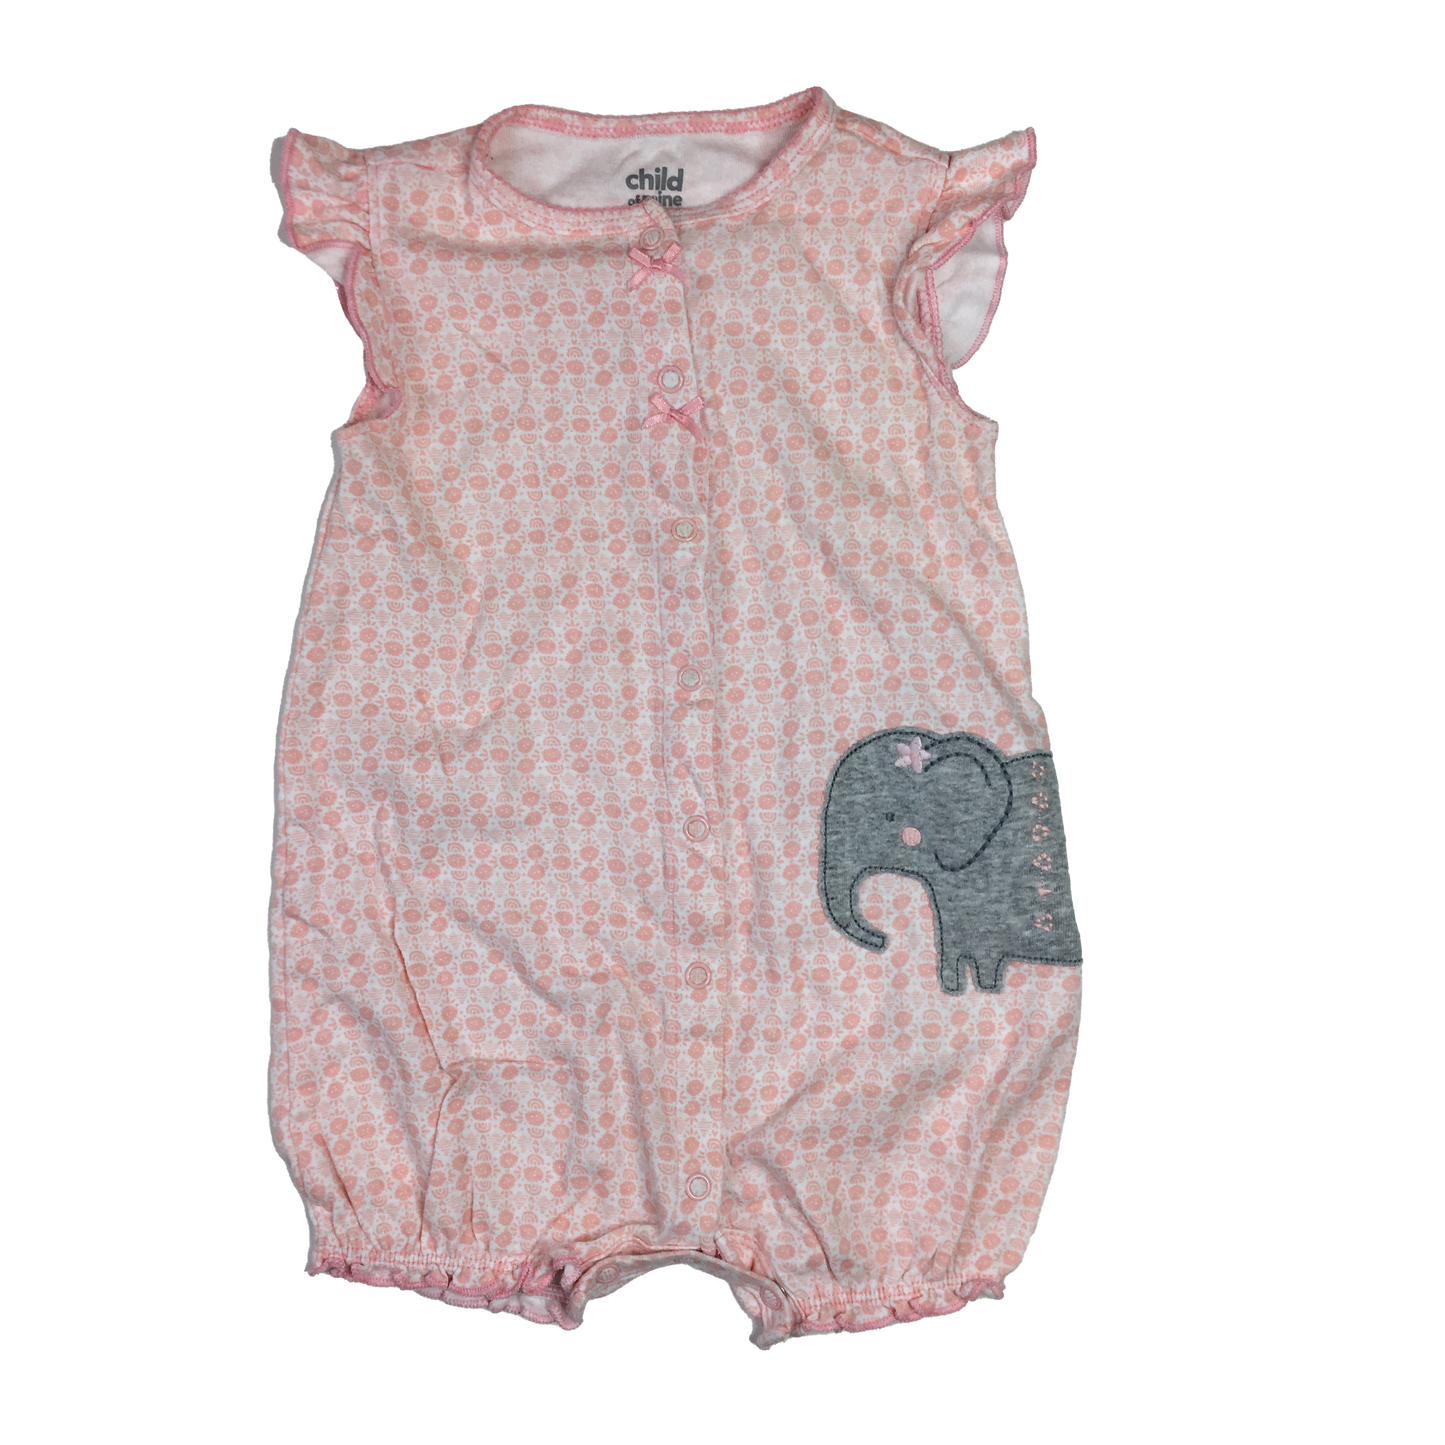 Child of Mine Pink Romper with Elephant 24M